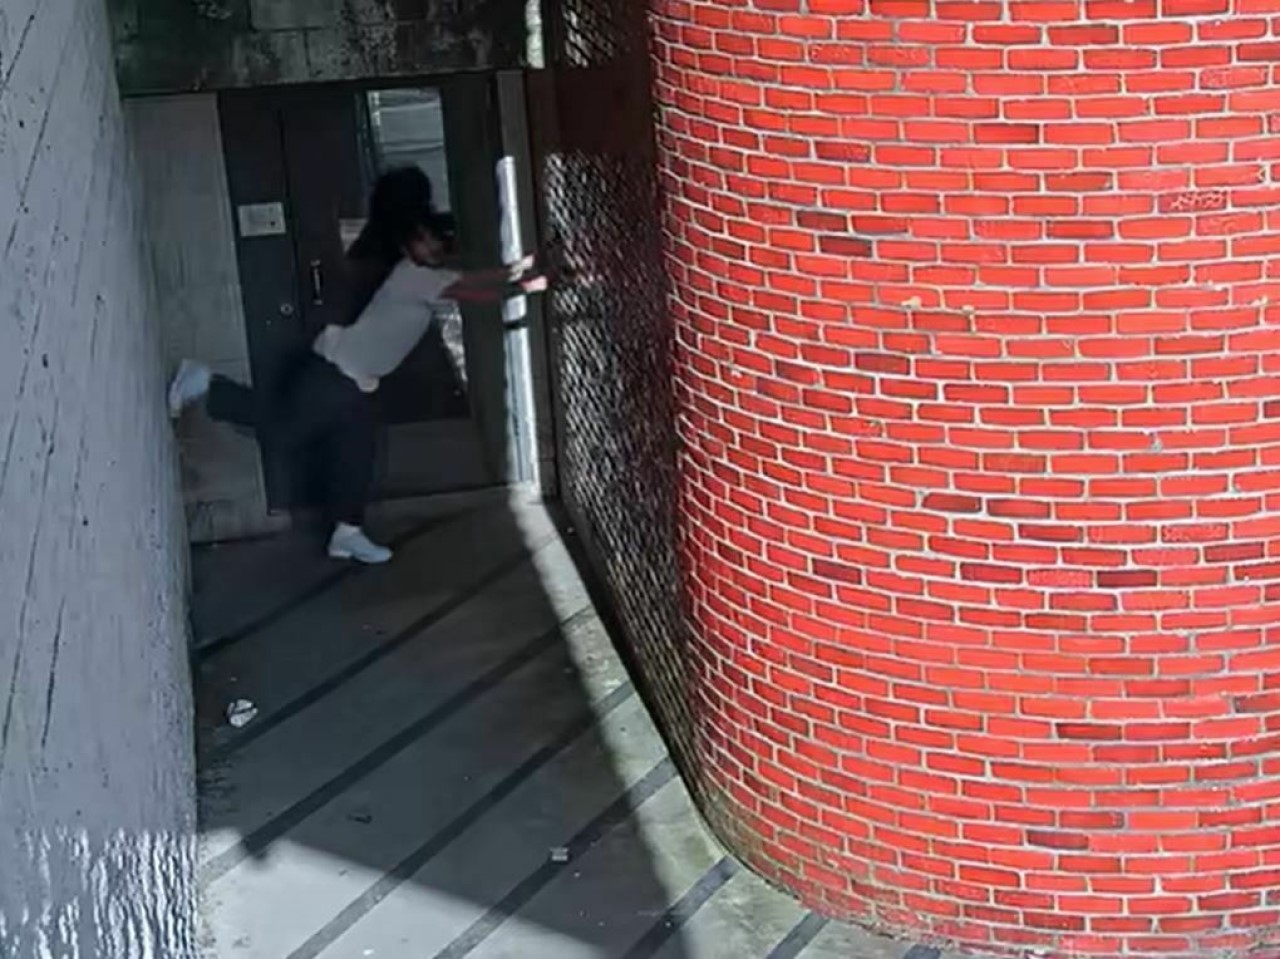 A screenshot from the video released by the Chester County Prison shows the moment escaped Pennsylvania inmate Danelo Cavalcante begins to crabwalk up a wall and out of sight.